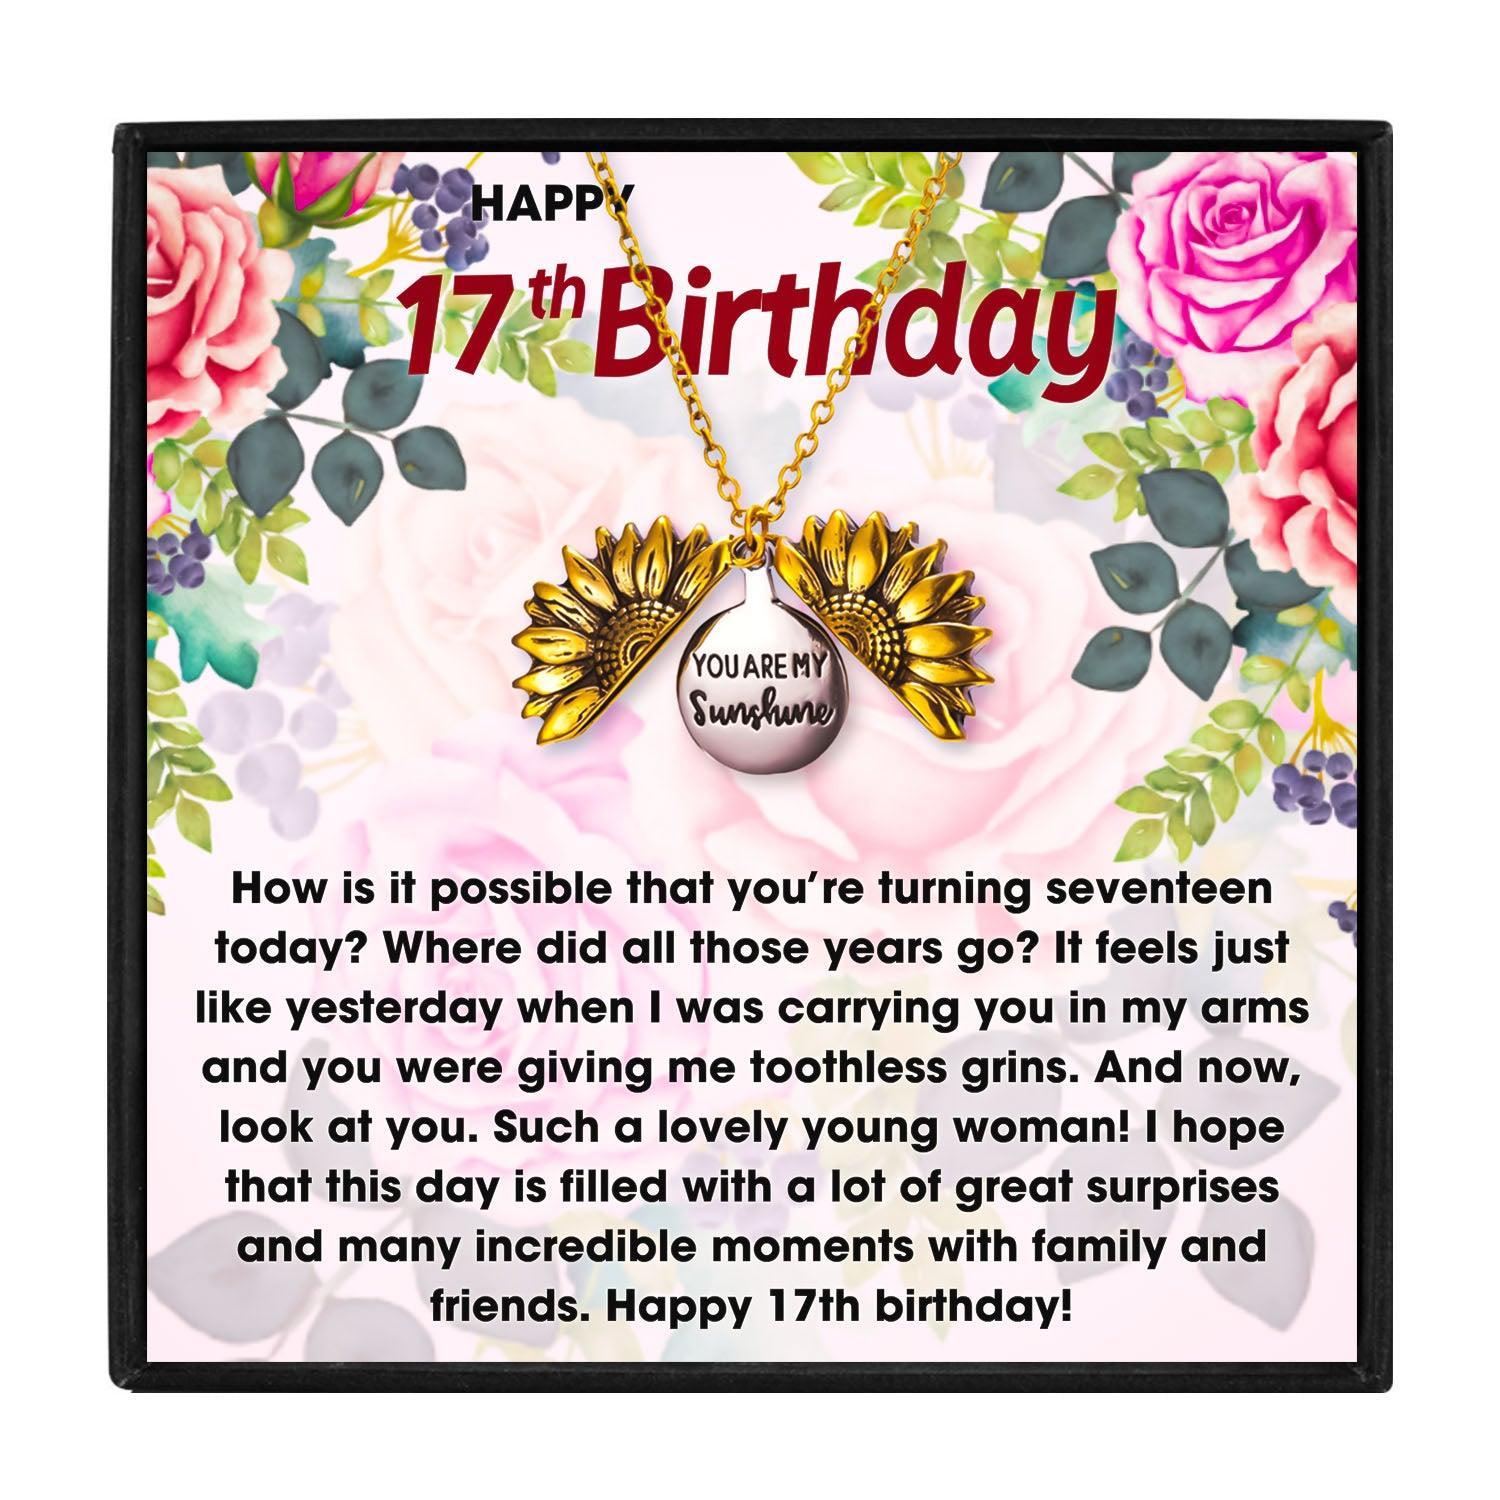 17th Birthday Gifts Ideas for Teens in 2023 | 17th Birthday Gifts Ideas for Teens - undefined | 17th birthday gift ideas, 17th birthday gift ideas for best friend, 17th birthday present ideas | From Hunny Life | hunnylife.com